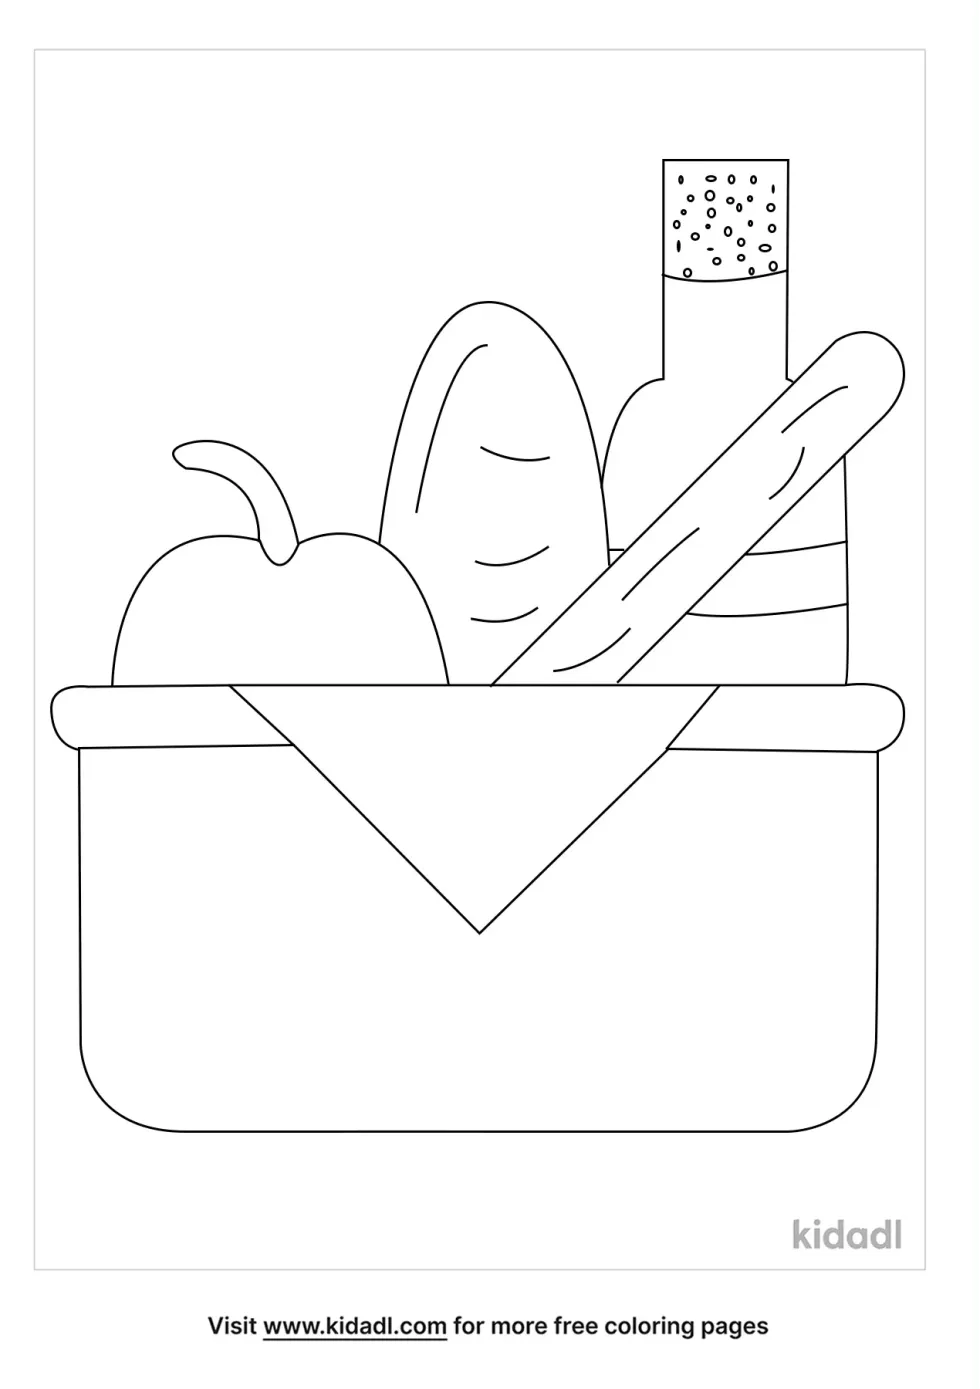 Basket Of Food Coloring Page